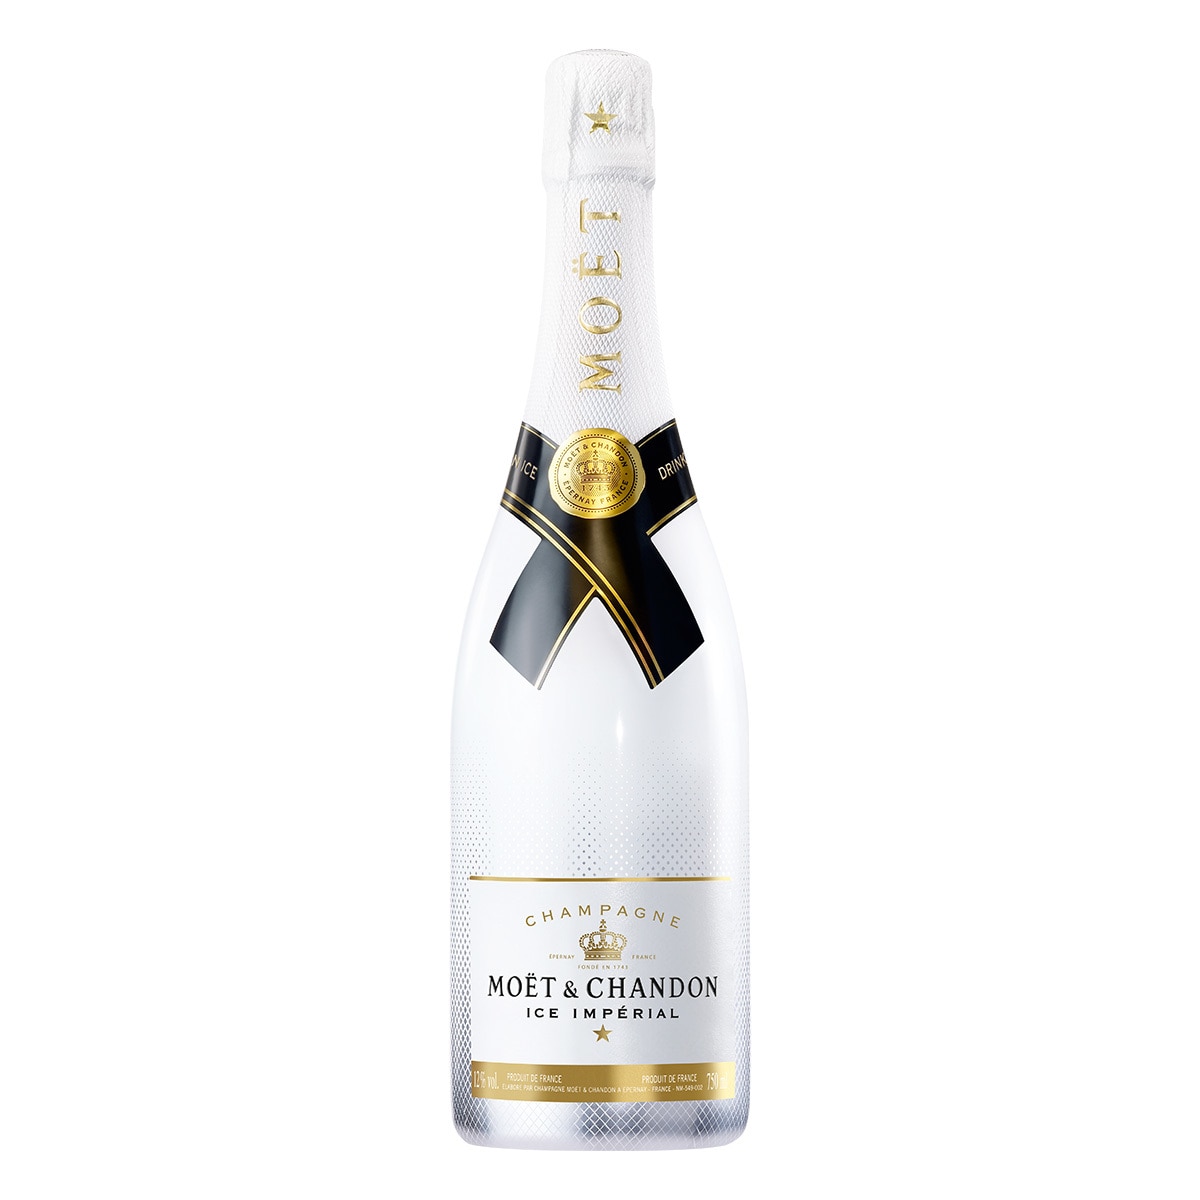 Moet & Chandon Ice Imperial champagne 750ml